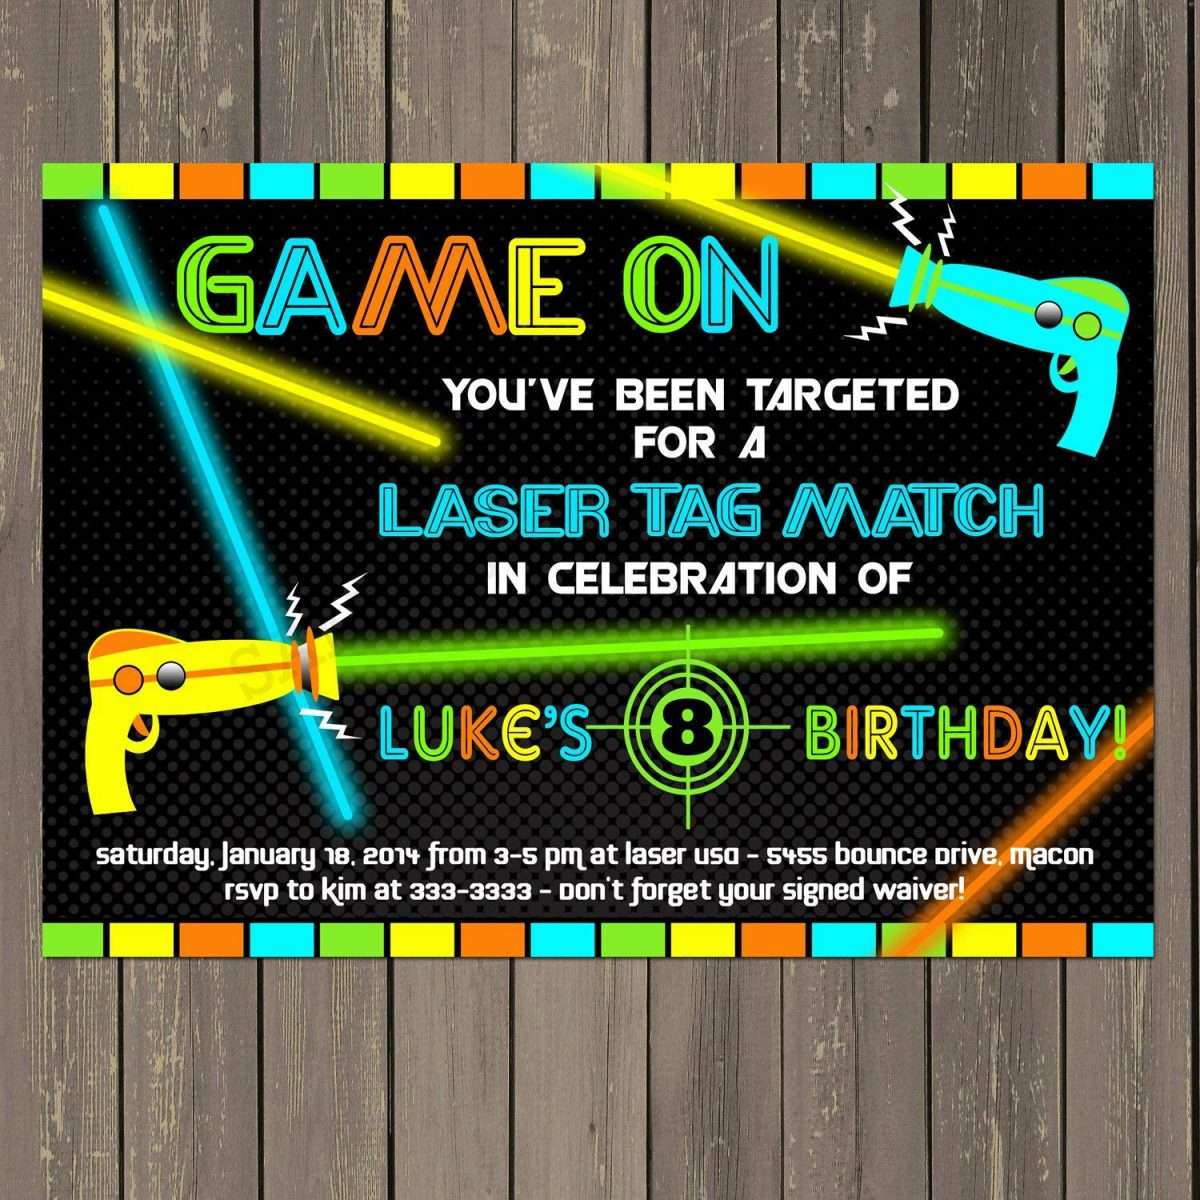 Amazon.com: Laser Tag Birthday Party Invitation with Laser Guns with ...